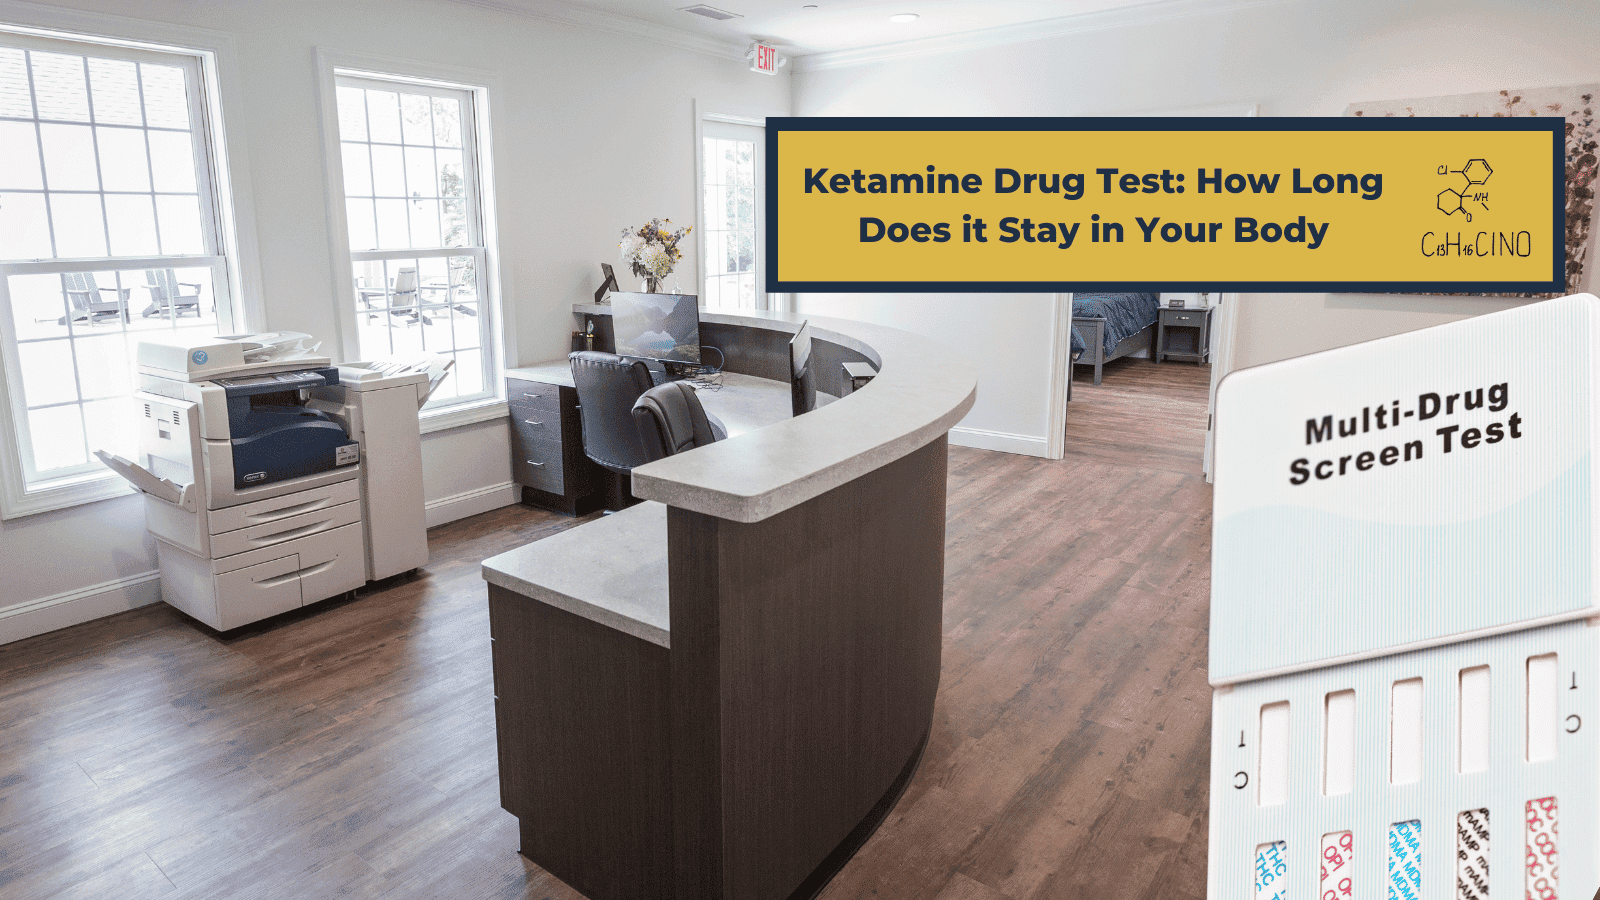 Ketamine Drug Test: How Long Does it Stay in Your Body?